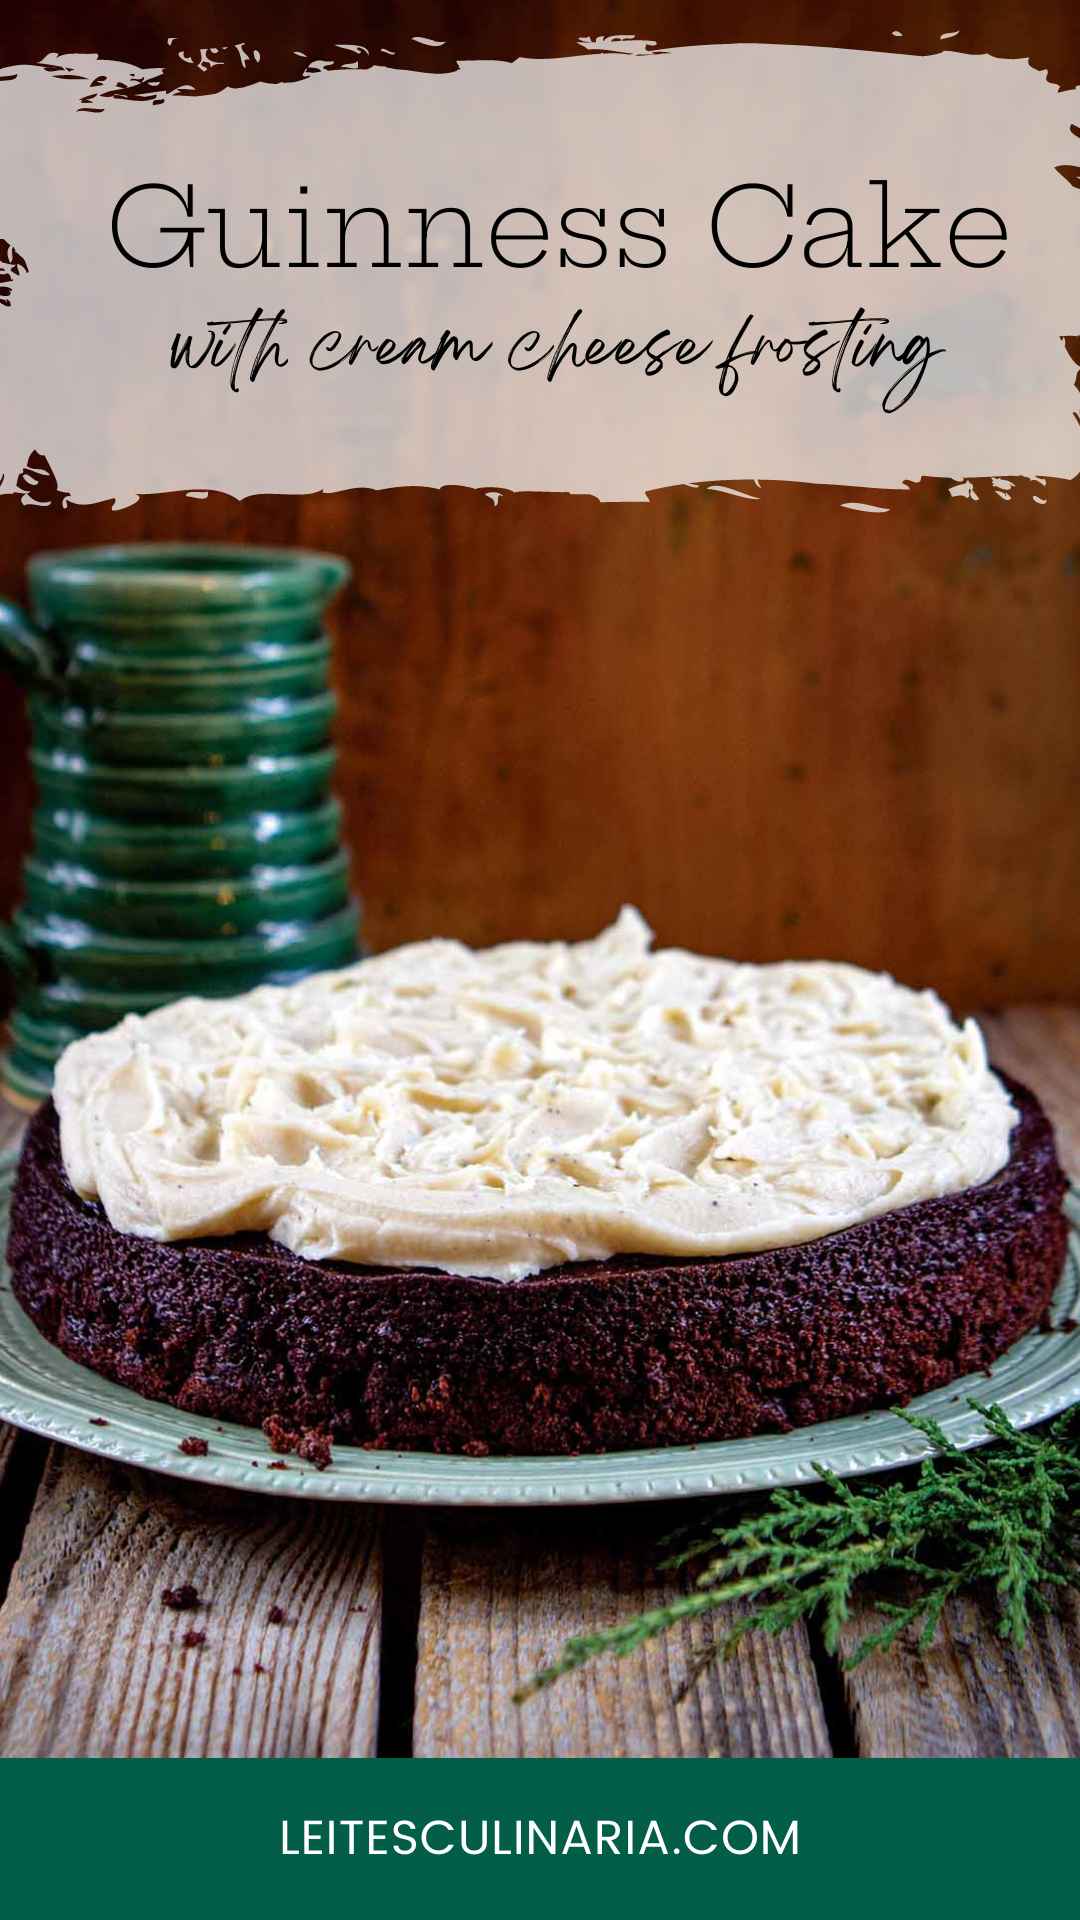 A chocolate cake topped with cream cheese frosting on a green plate.